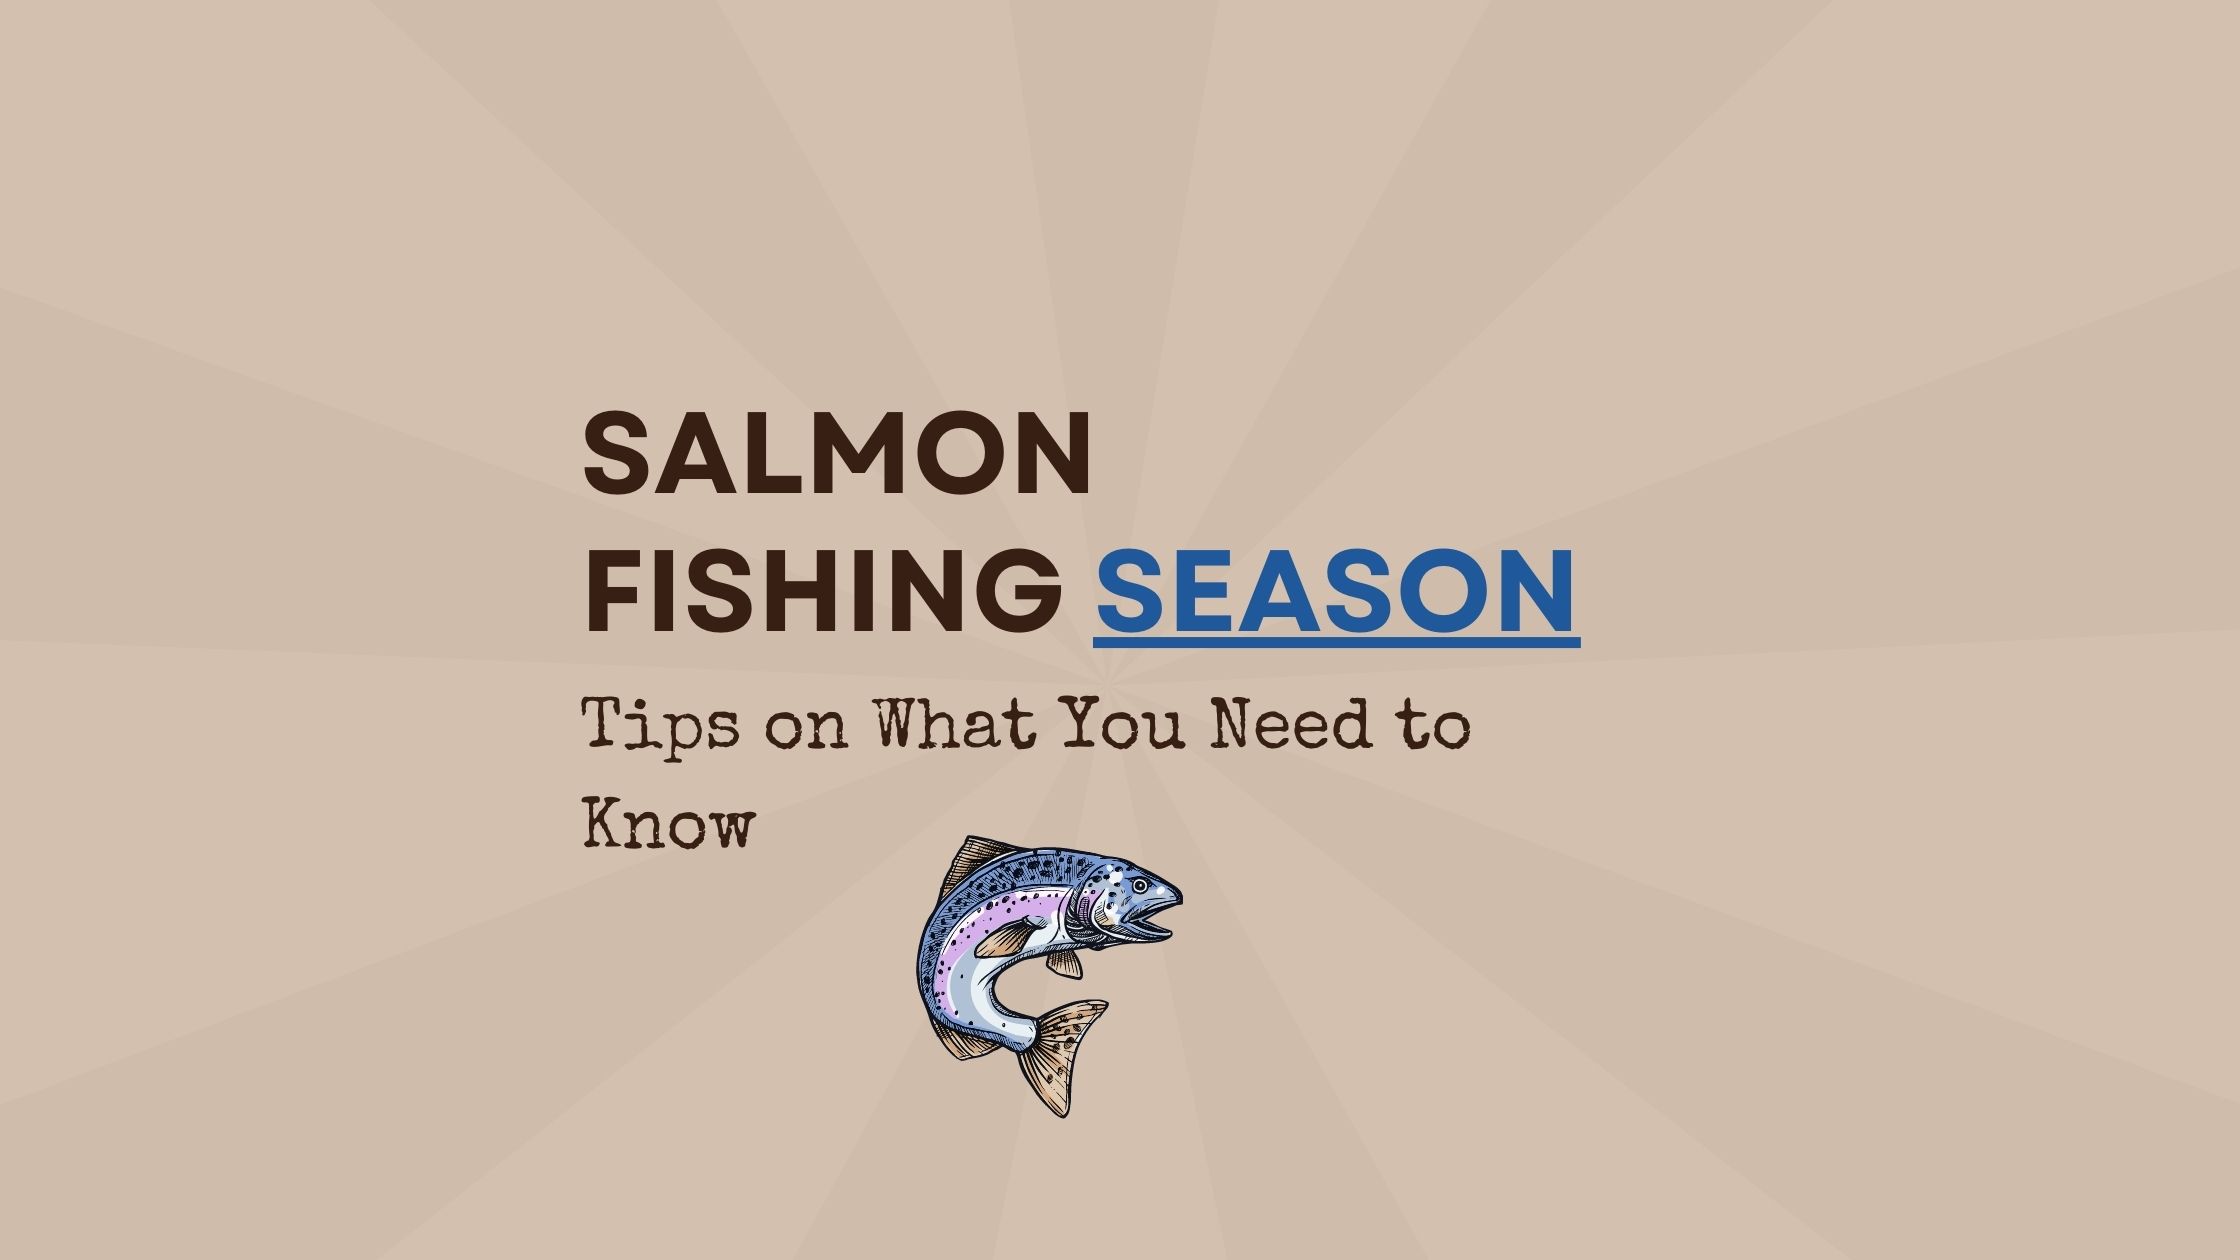 Salmon Fishing Season is Here! Tips on What You Need to Know